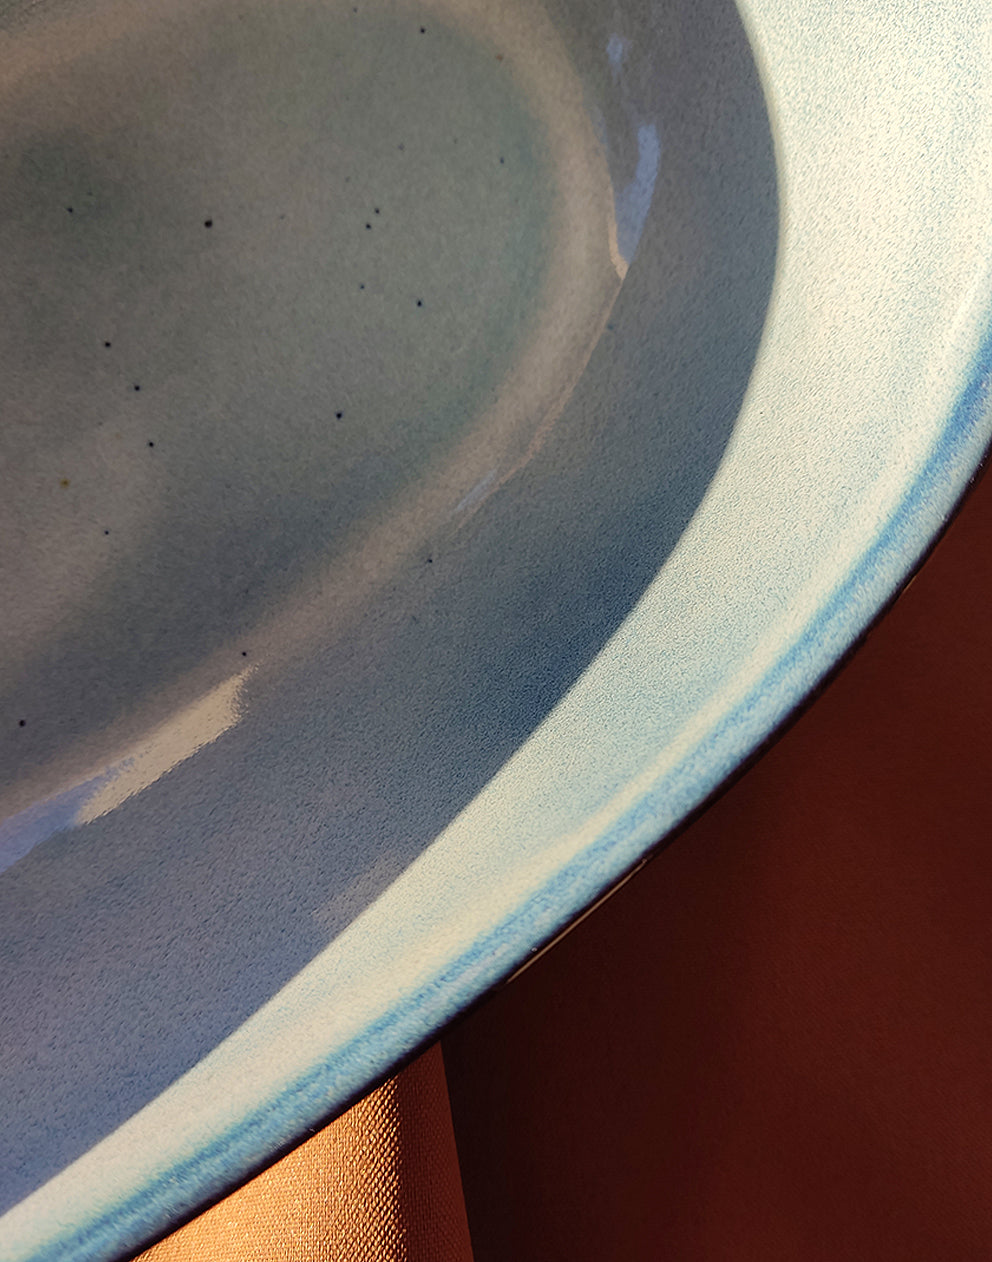 Stoneware Serving Bowl in Blue